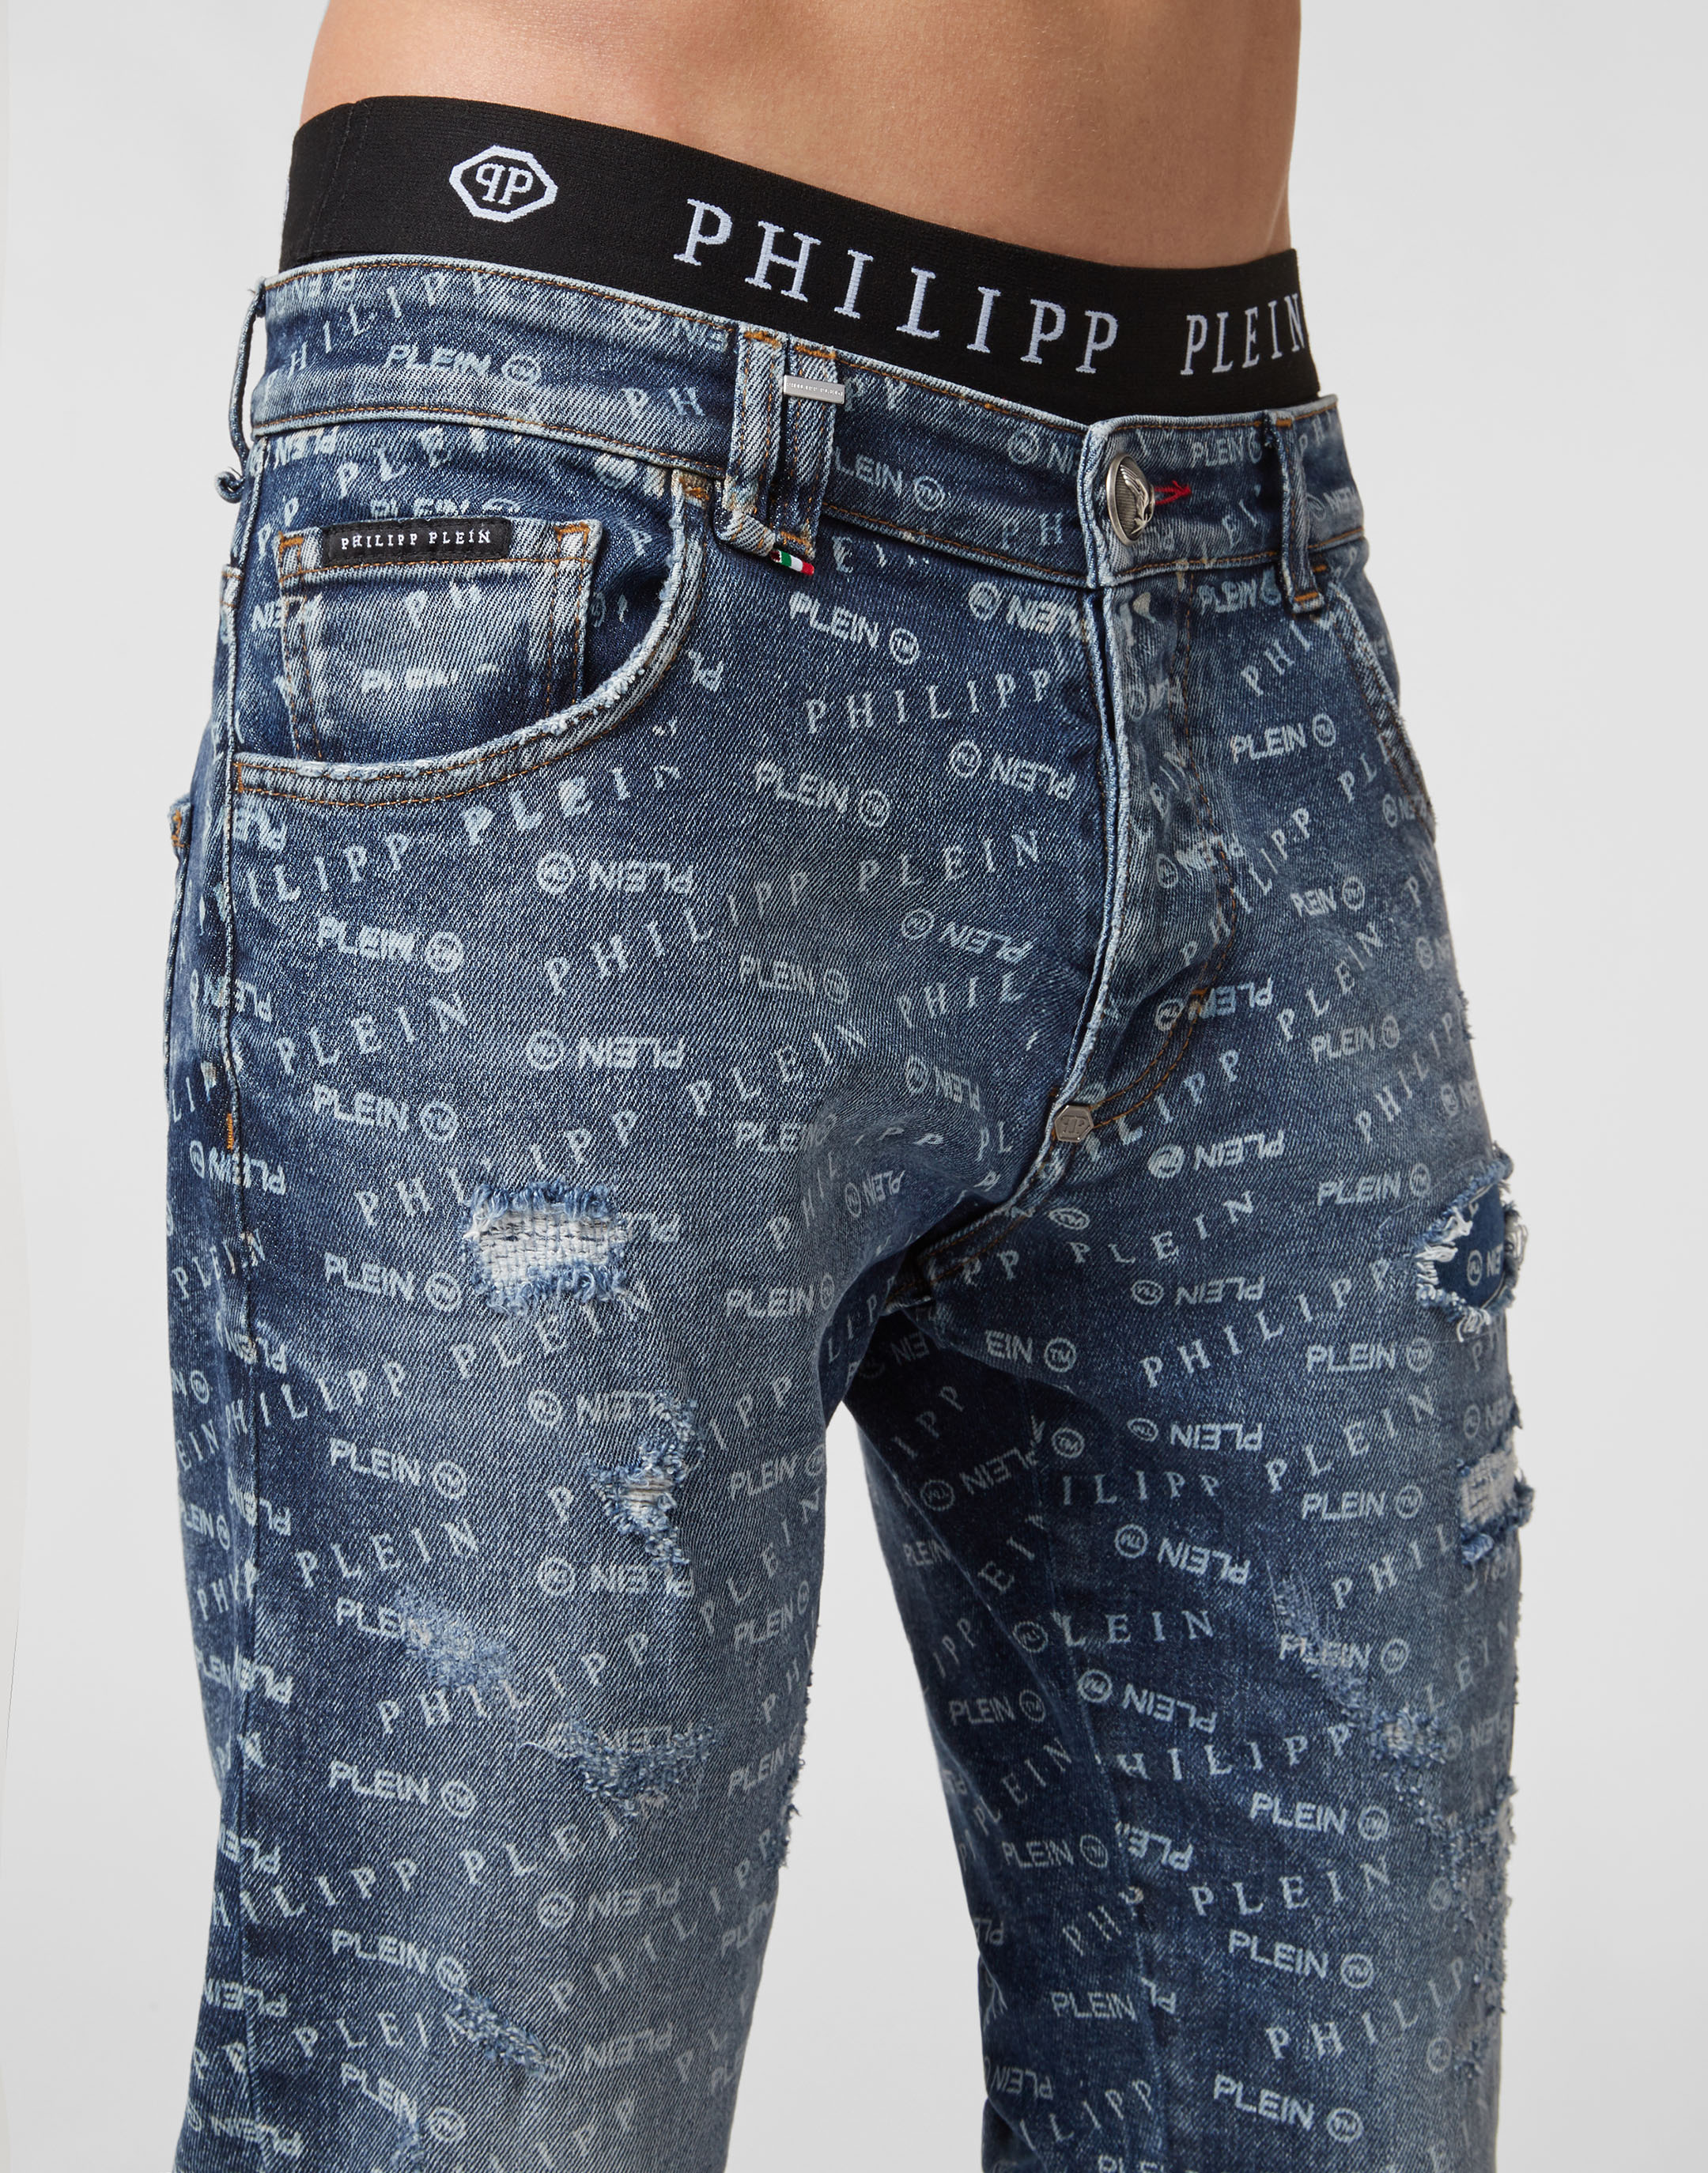 Super Straight Cut All over PP | Philipp Plein Outlet